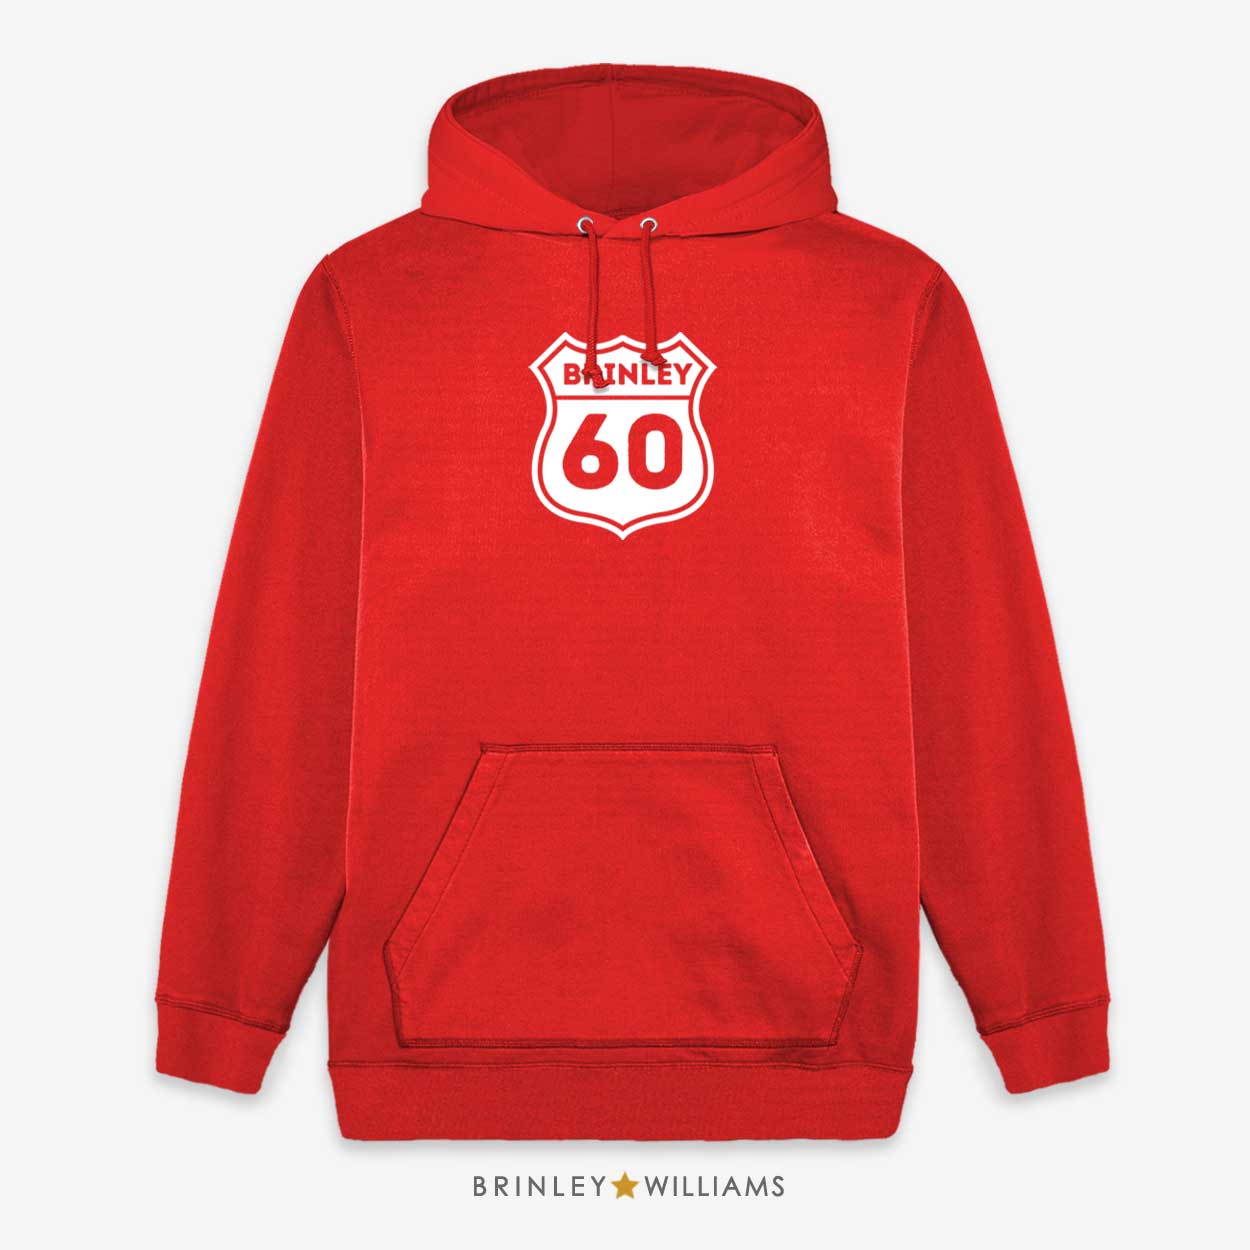 Route Year Personalised Unisex Hoodie -  Fire Red